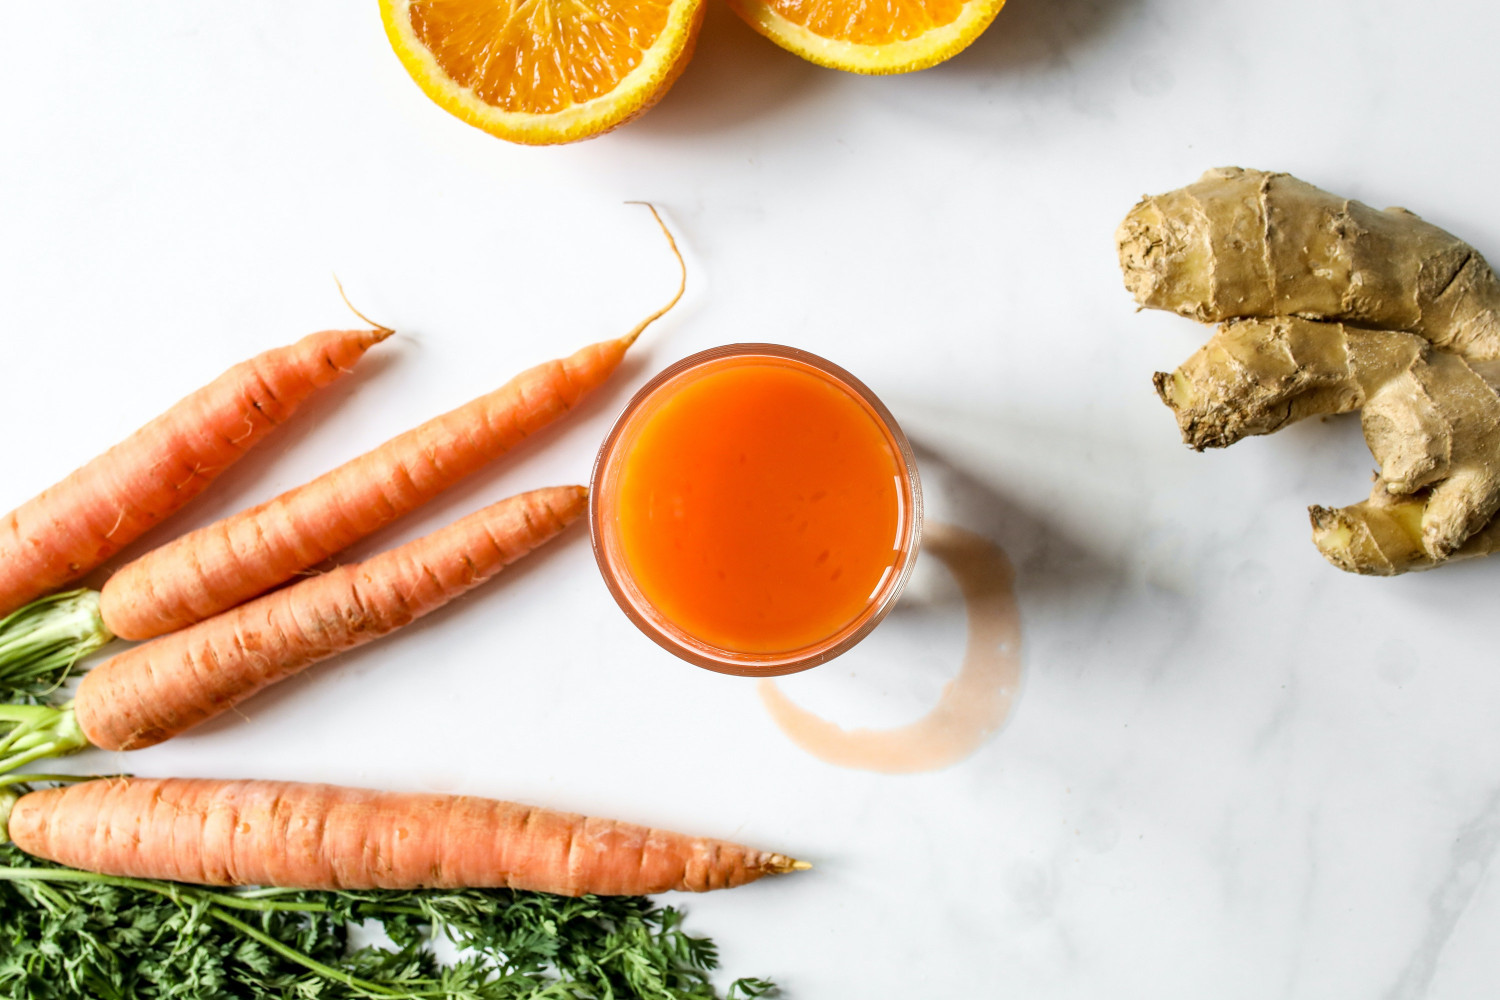 A cup of carrot and ginger juice, carrots, and ginger - Healthy Food Options for Seniors - Focus Care